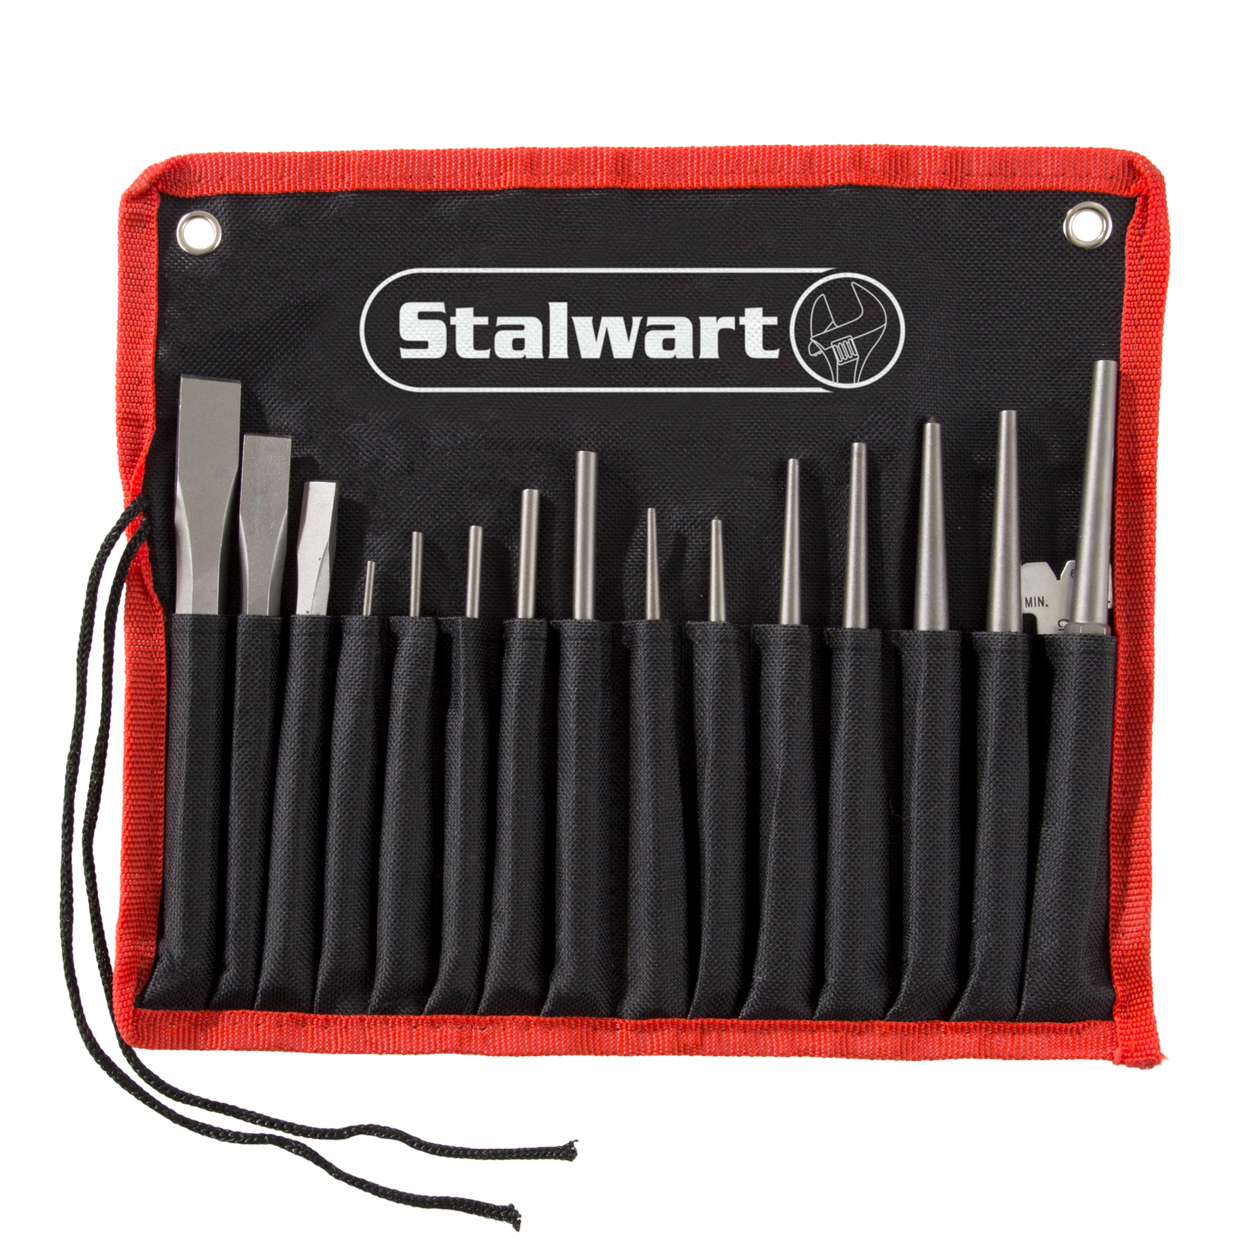 Punch And Chisel Set, 16 Pieces- Includes Taper Punches, Cold Chisels, Pin Punches, Center Punches, Chisel Gauge, And Storage Case